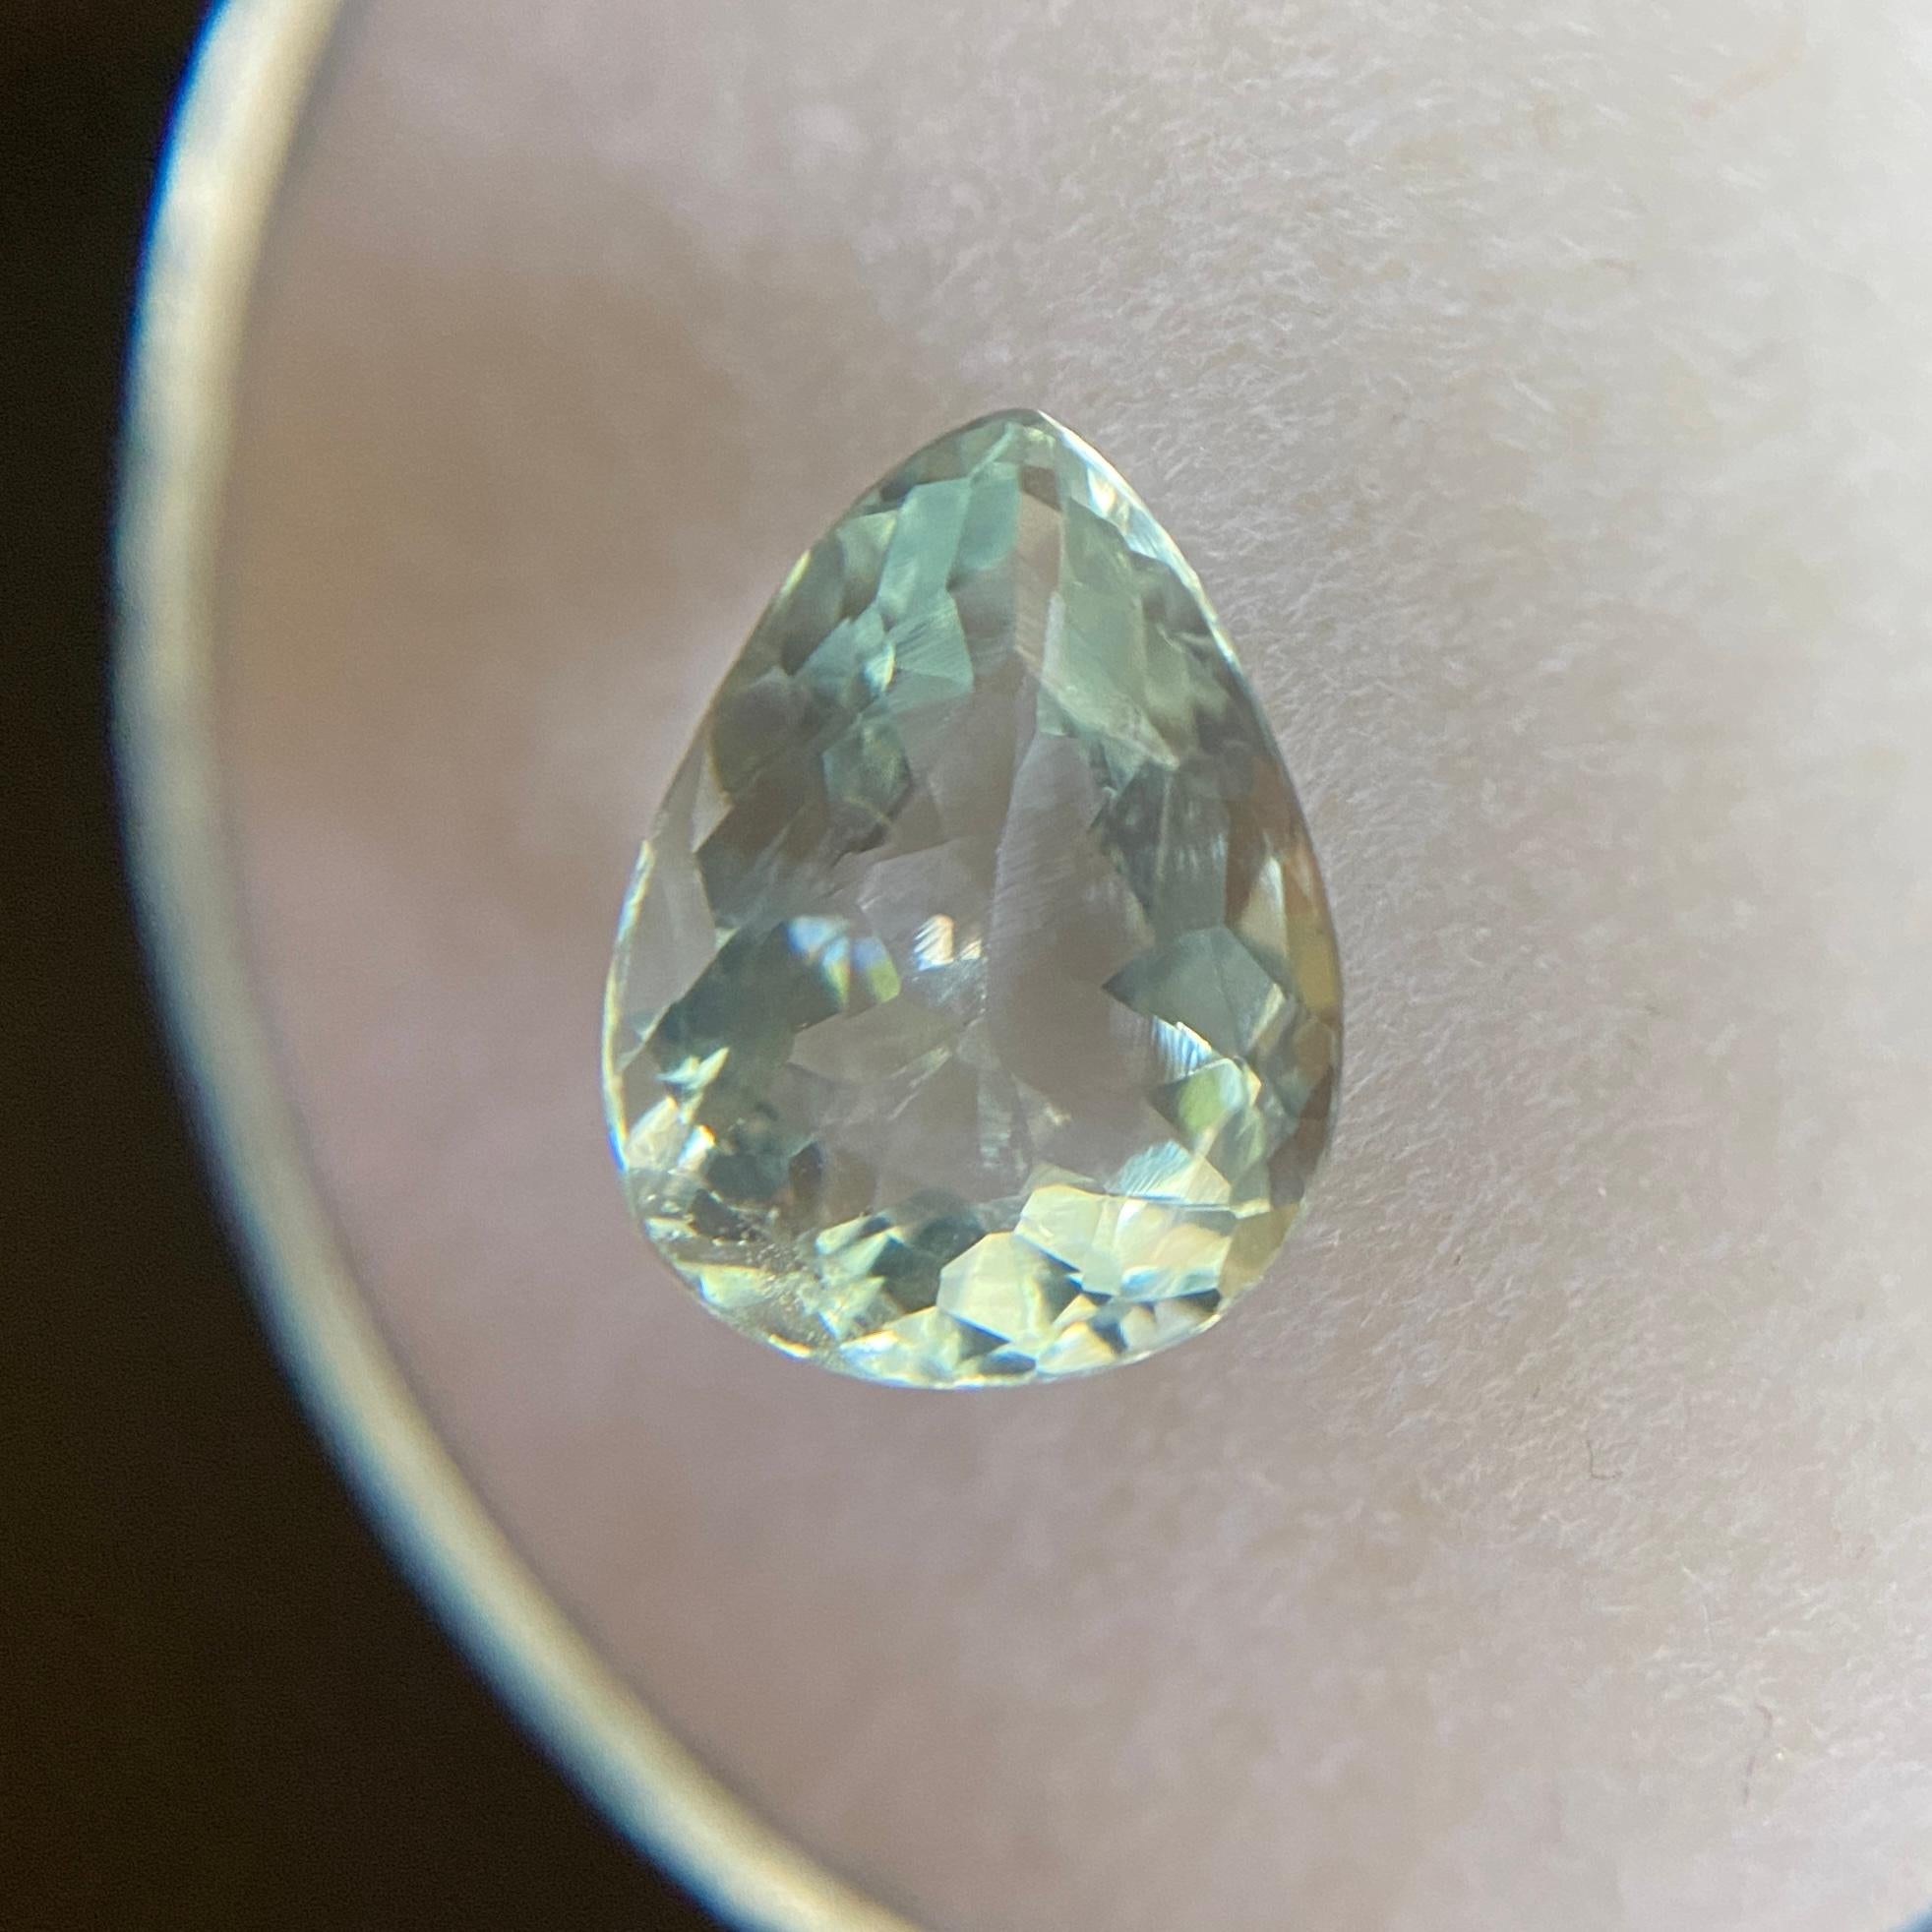 Natural Blue Aquamarine Gemstone.

1.65 Carat with a beautiful blue colour and excellent clarity. A very clean stone with only some small natural inclusions visible when looking closely.

Also has an excellent pear teardrop cut with ideal polish to